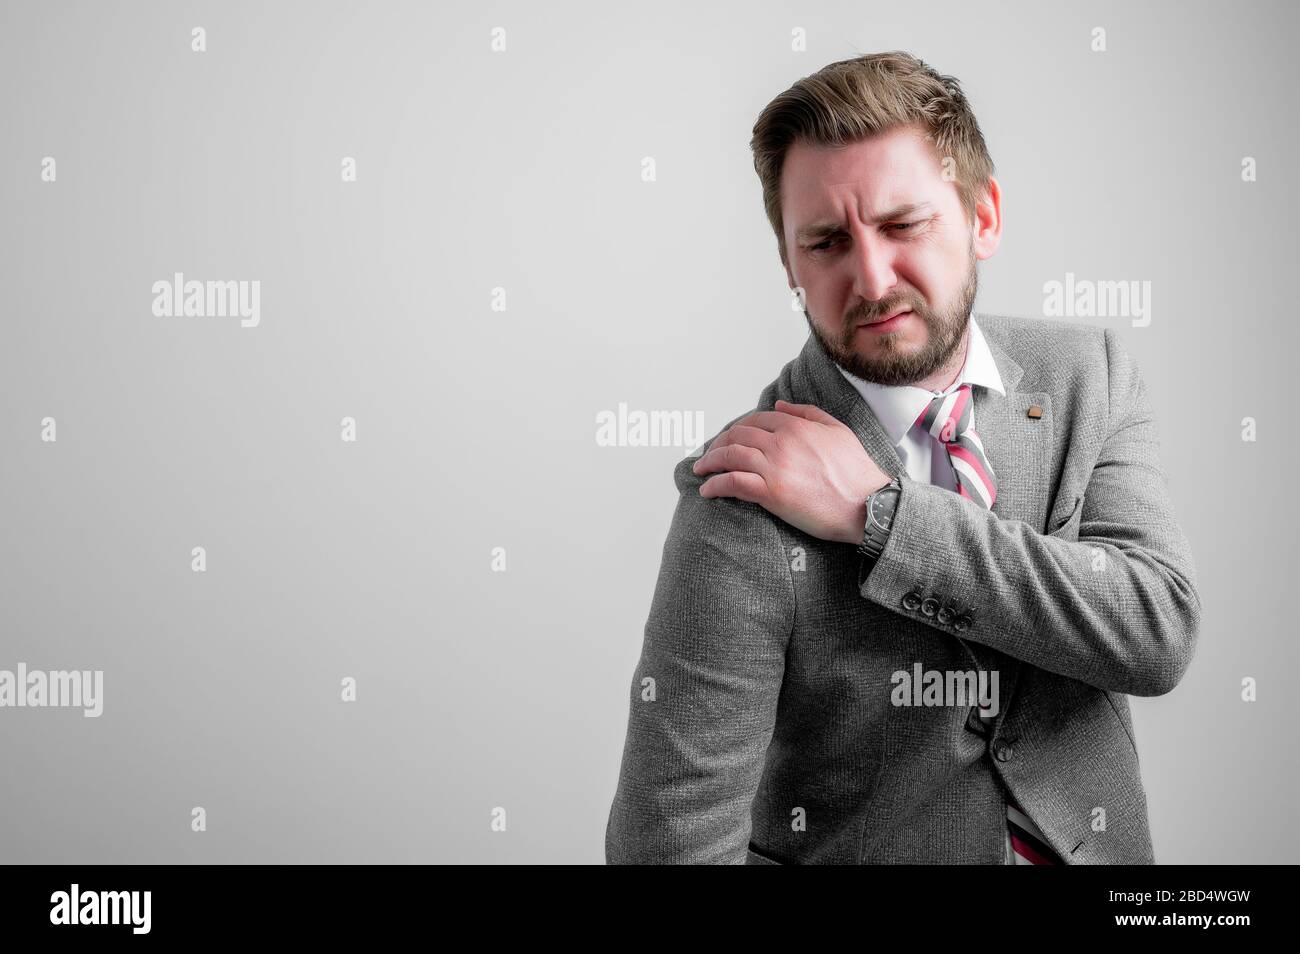 Portrait of business man wearing business clothes gesturing shoulder ache isolated on grey background with copy space advertising area Stock Photo